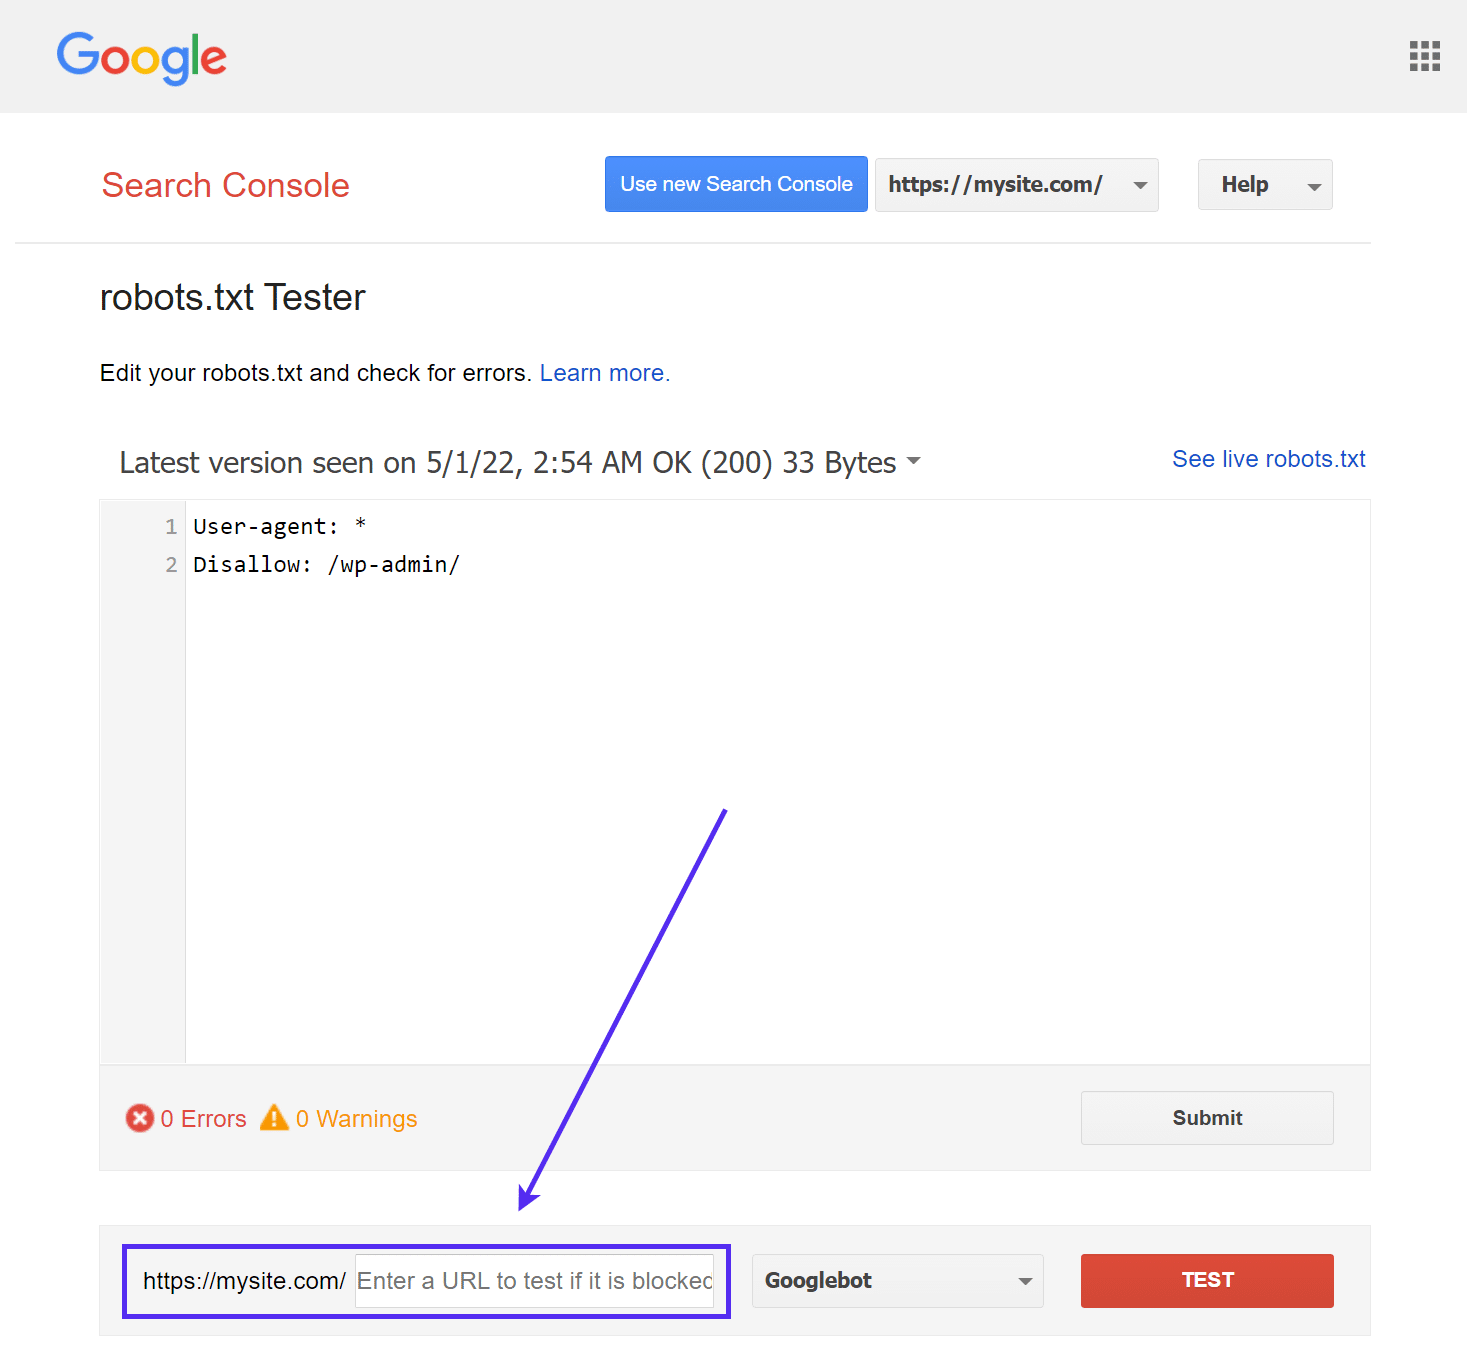 Google's robots.txt Testing tool with an arrow pointing to the URL submission field.